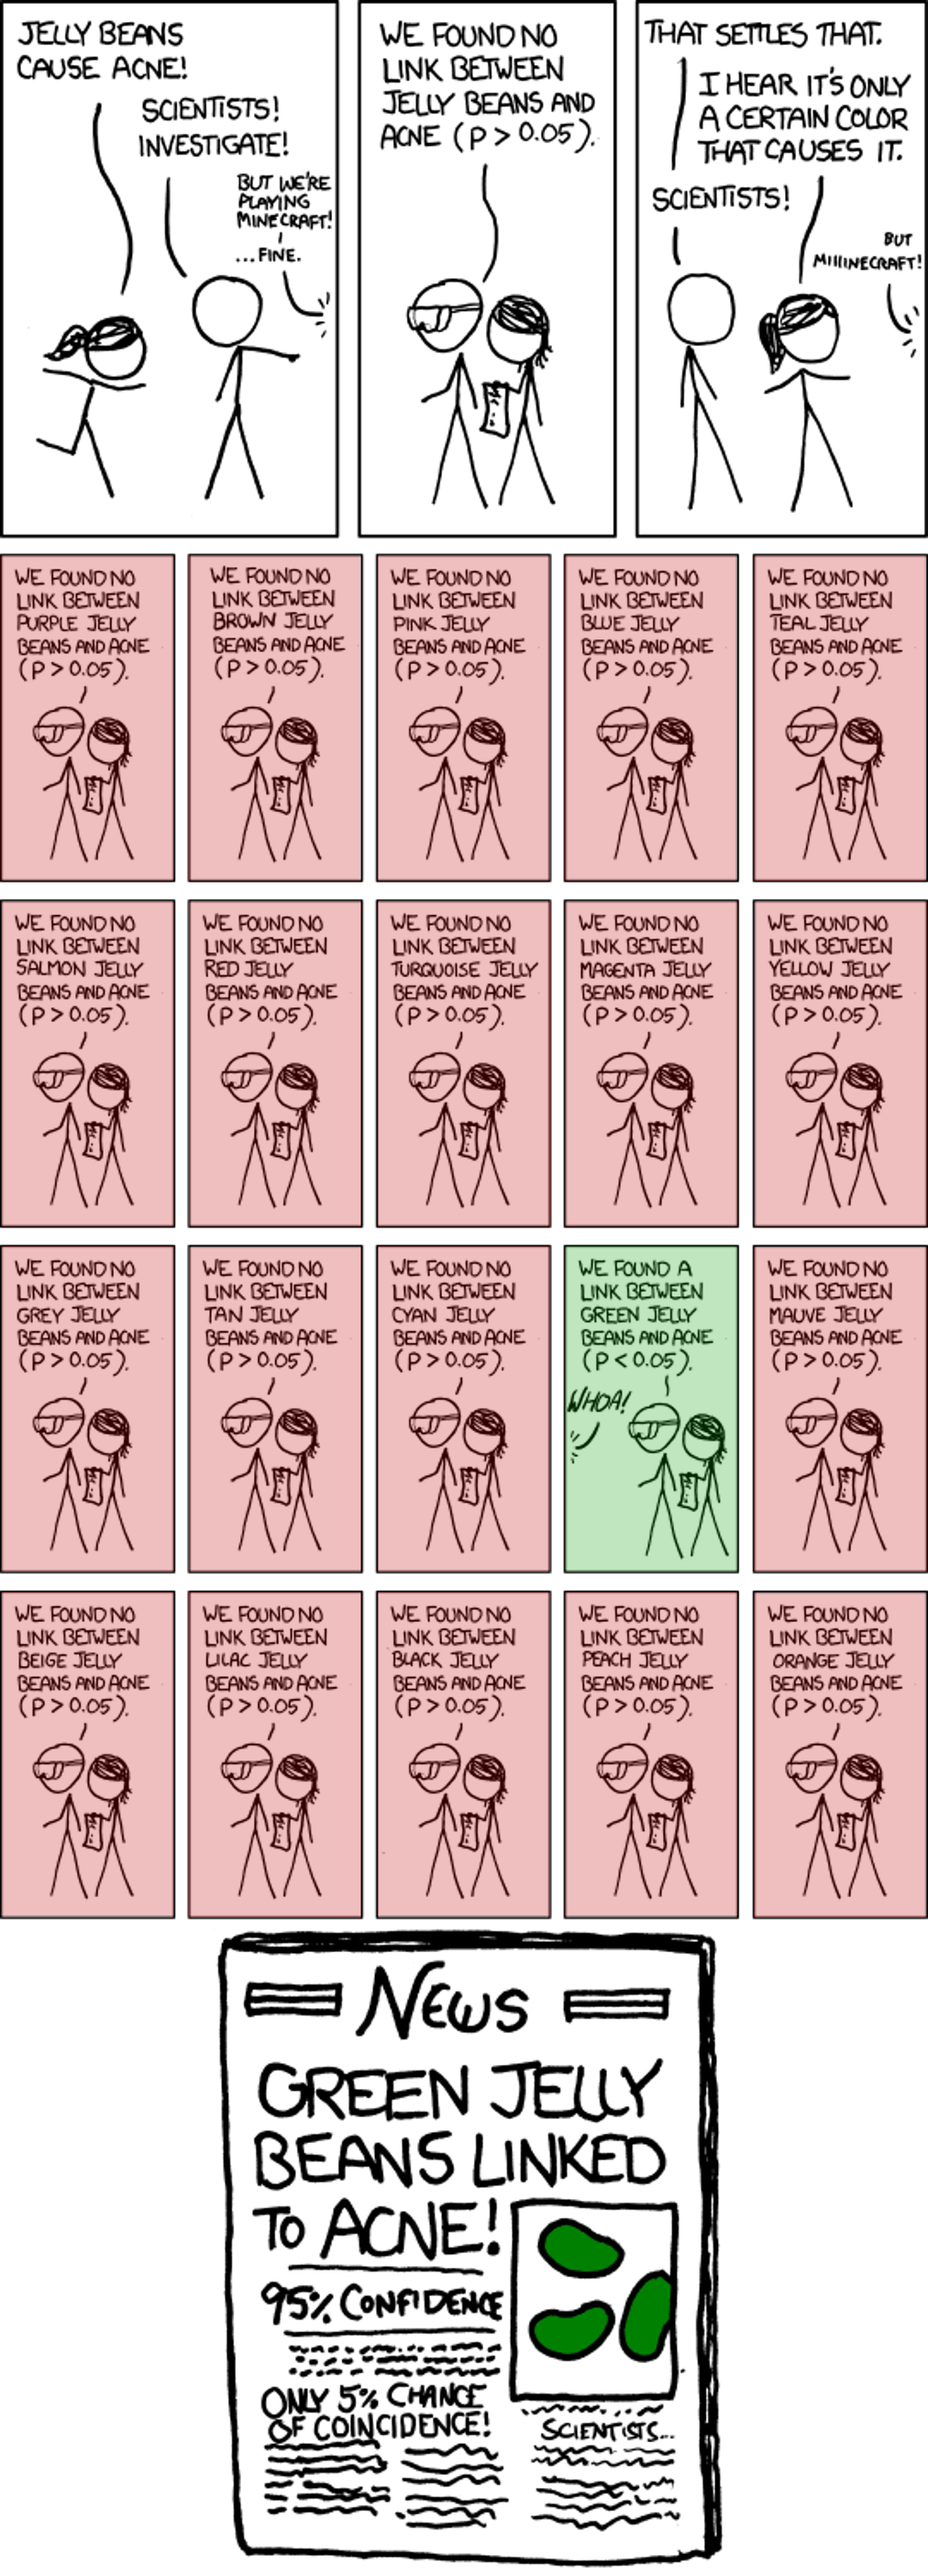 XKCD significant